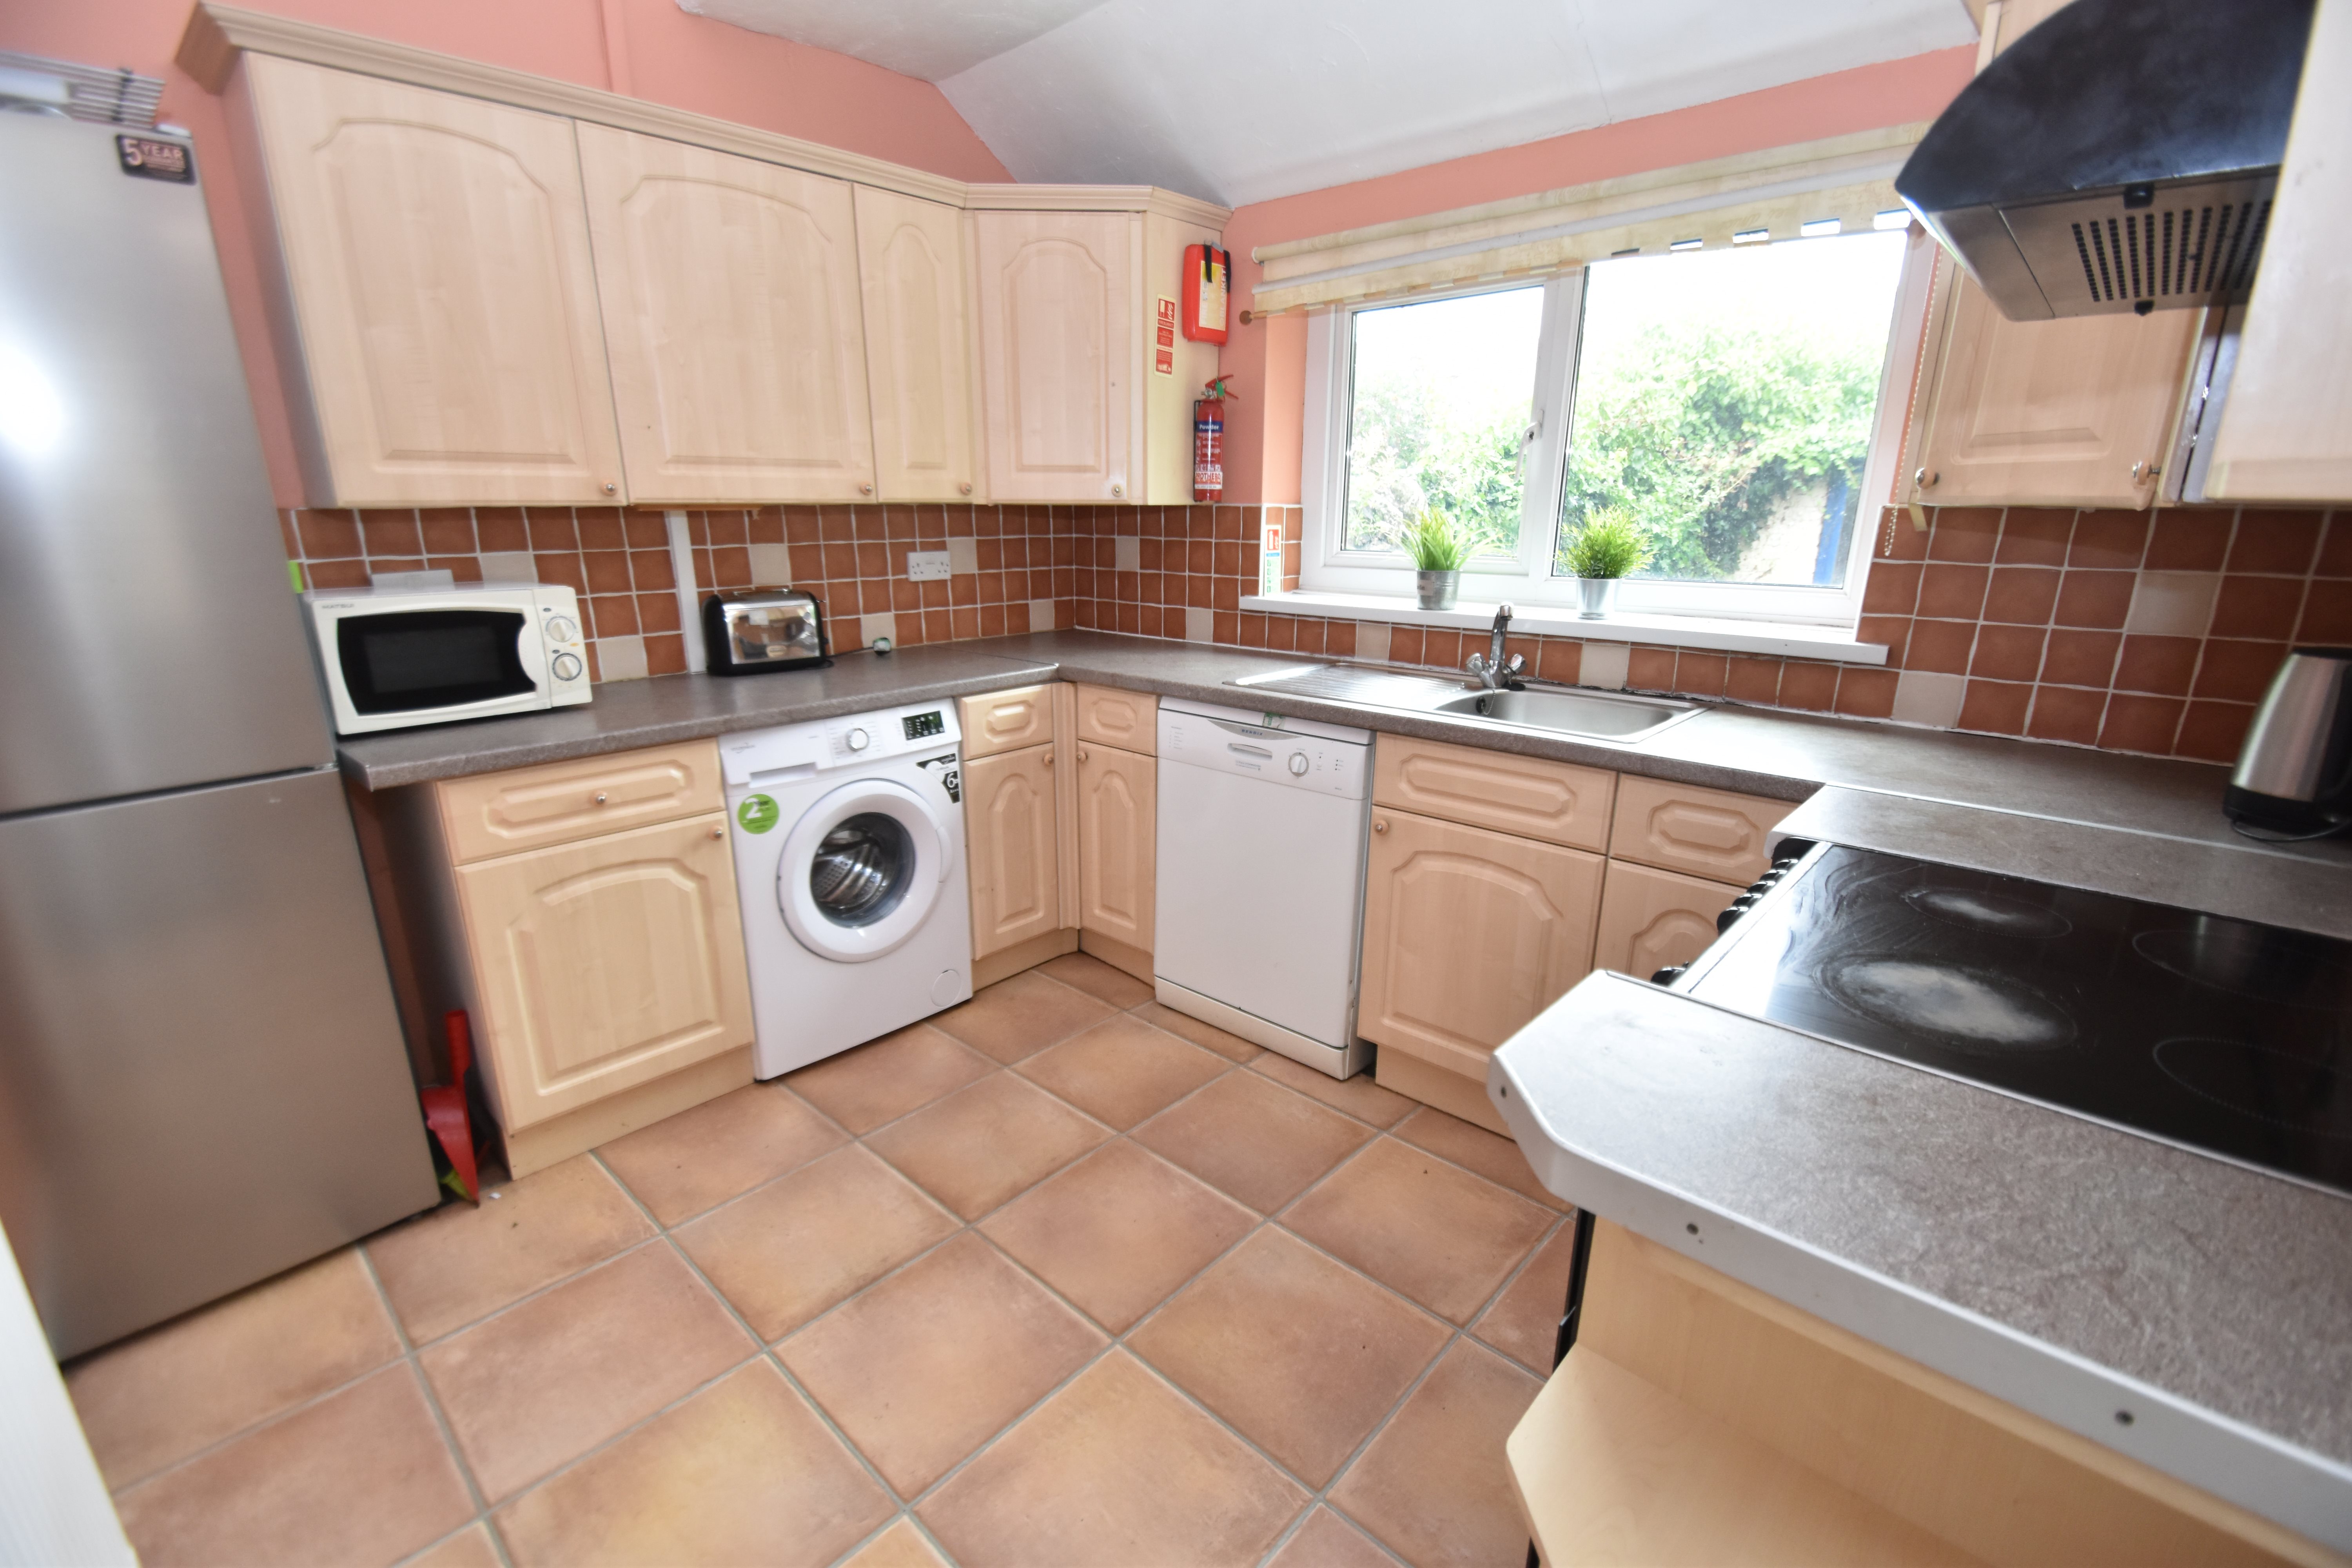 4 bed house to rent in Lisvane Street, Cathays  - Property Image 7